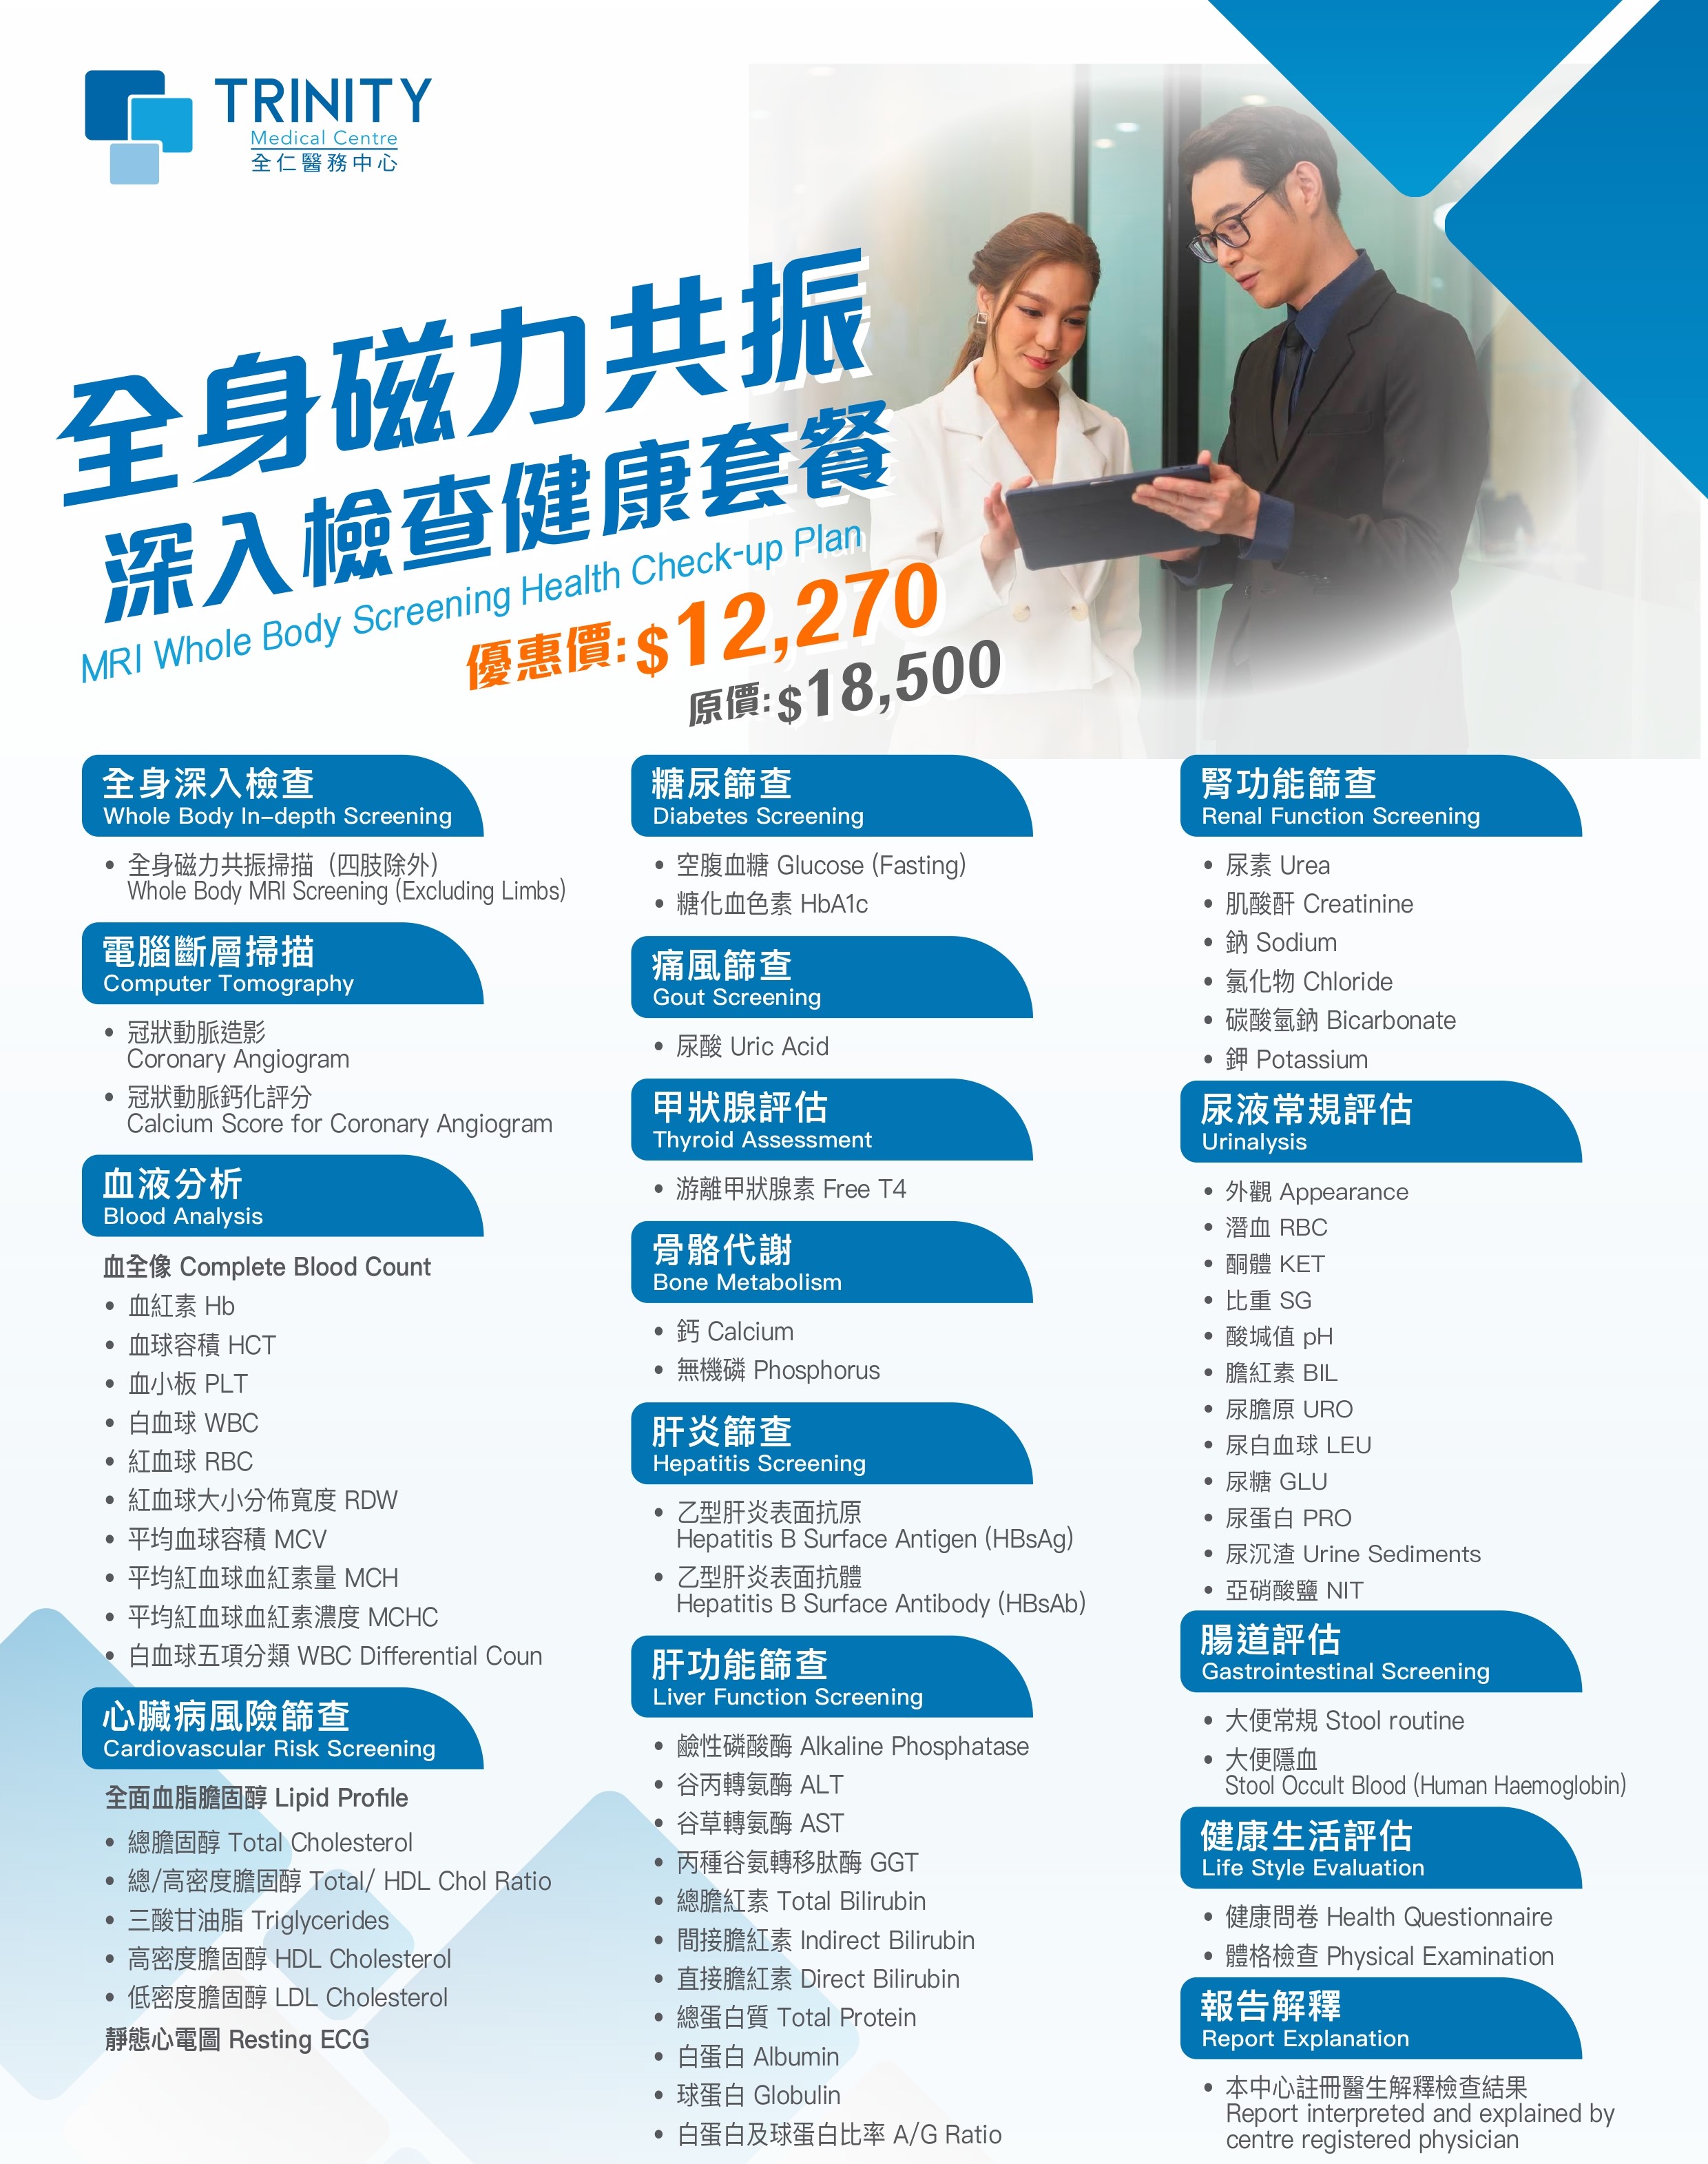 【Central Clinic｜eShop Exclusive】MRI Whole Body Screening Health Check-up Plan